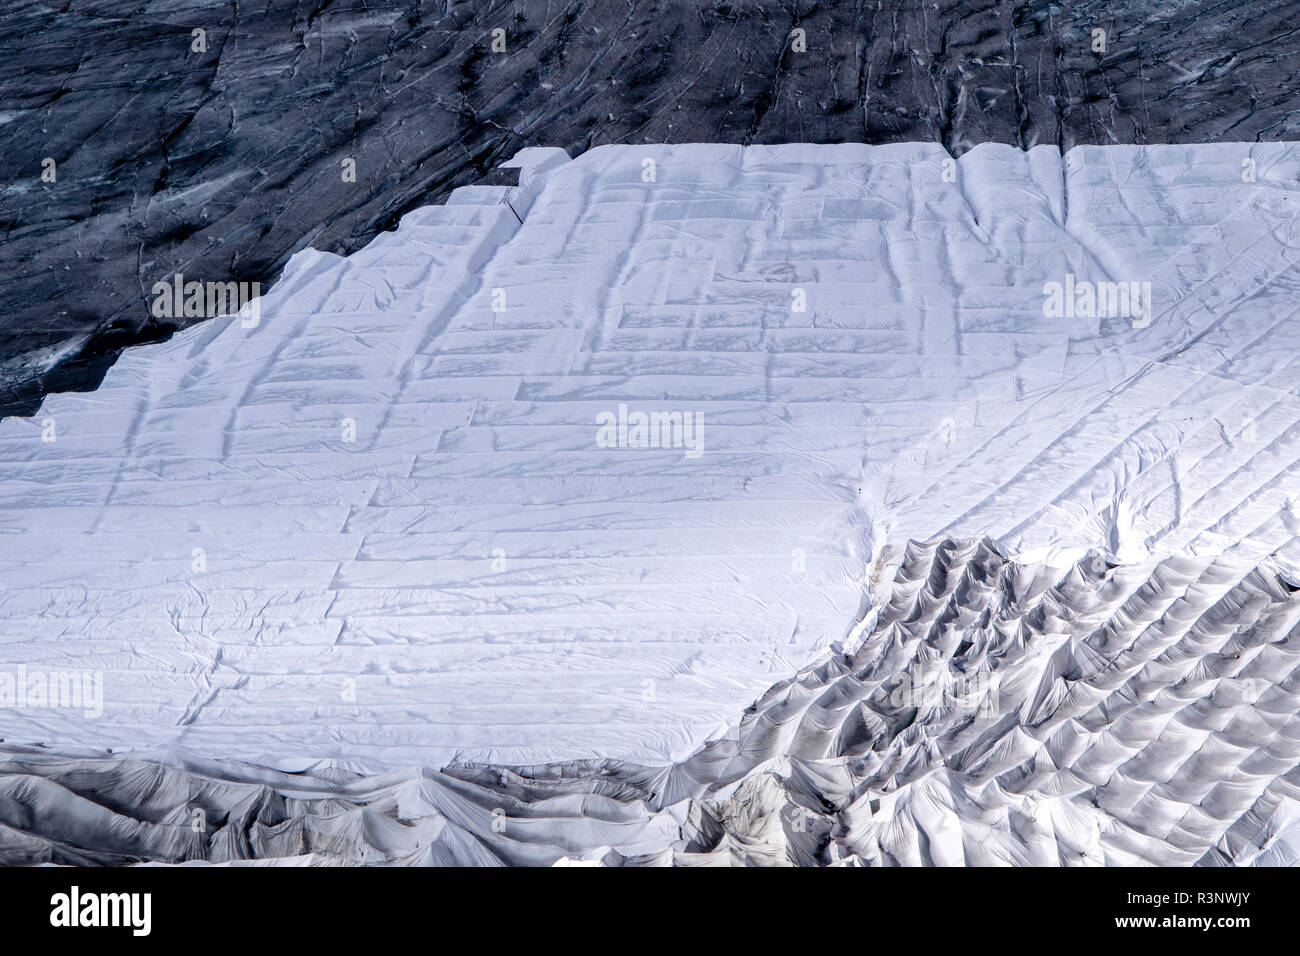 Climate | Albedo | Rhone: Huge fleece blankets cover parts of the Rhone Glacier in Switzerland in an attempt to stall the inevitable melting of the snow and ice. After a winter with record amounts of snow, most of it was gone when this image was taken on July 14th 2018, exposing the darker ice. While snow is a brilliant reflector of the energy from the sun, the darker ice absorbs the energy instead, accelerating the melting of the glacier. The color and darkness of glacier ice vary all over the world, depending on build-up of pollution, age of the ice, particles picked up by the ice and by mic Stock Photo